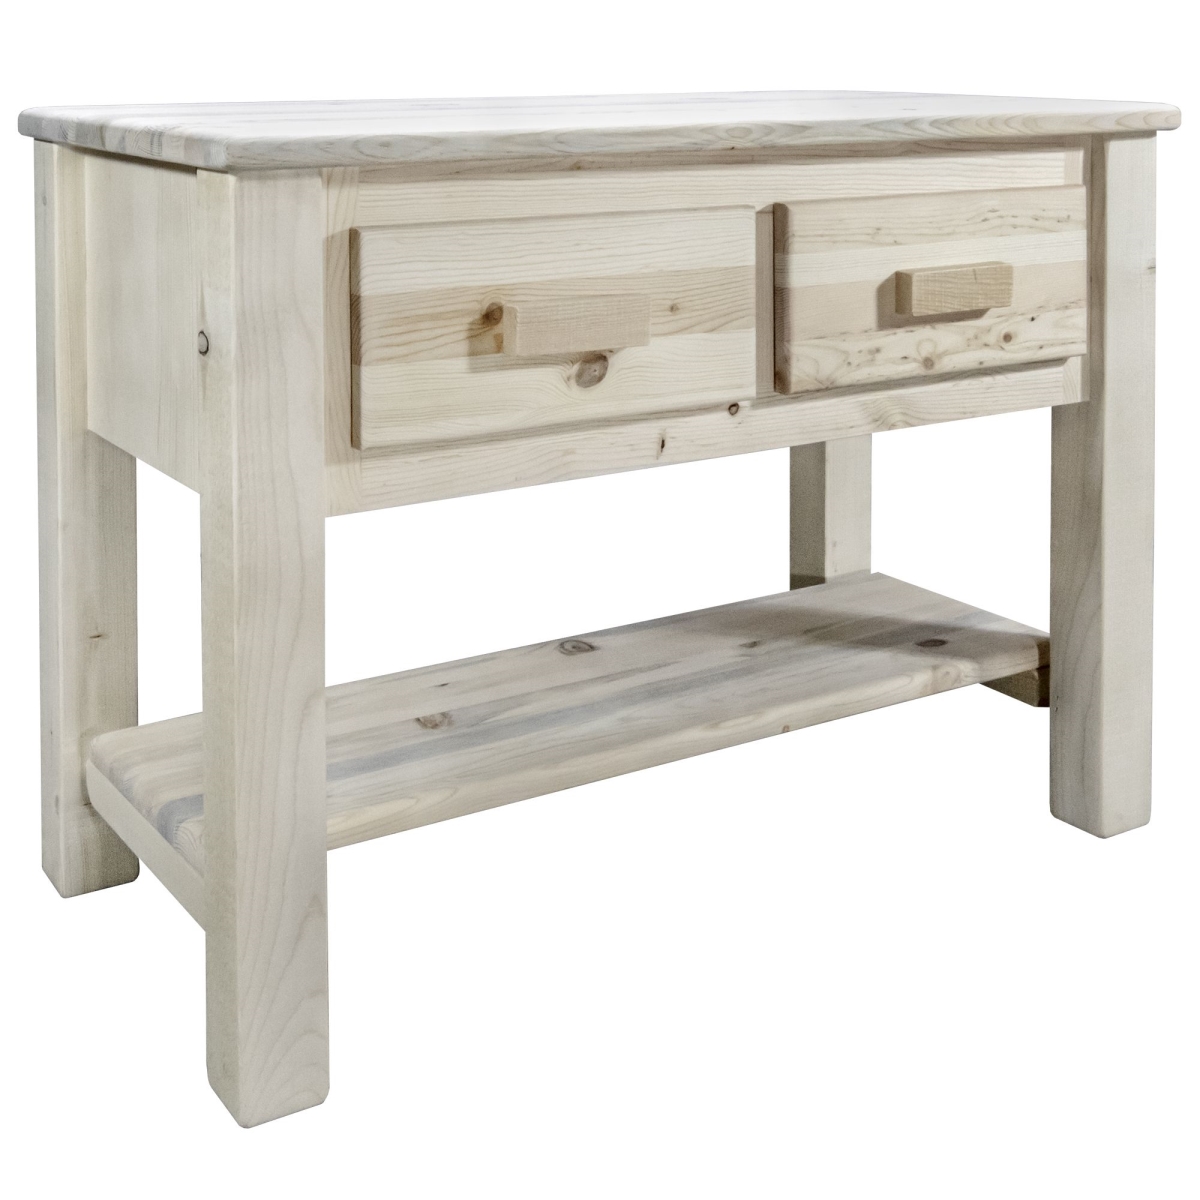 Mwhccontblw2drv Homestead Collection Console Table With 2 Drawers, Clear Lacquer - 5.5 X 11.75 X 10.5 In.